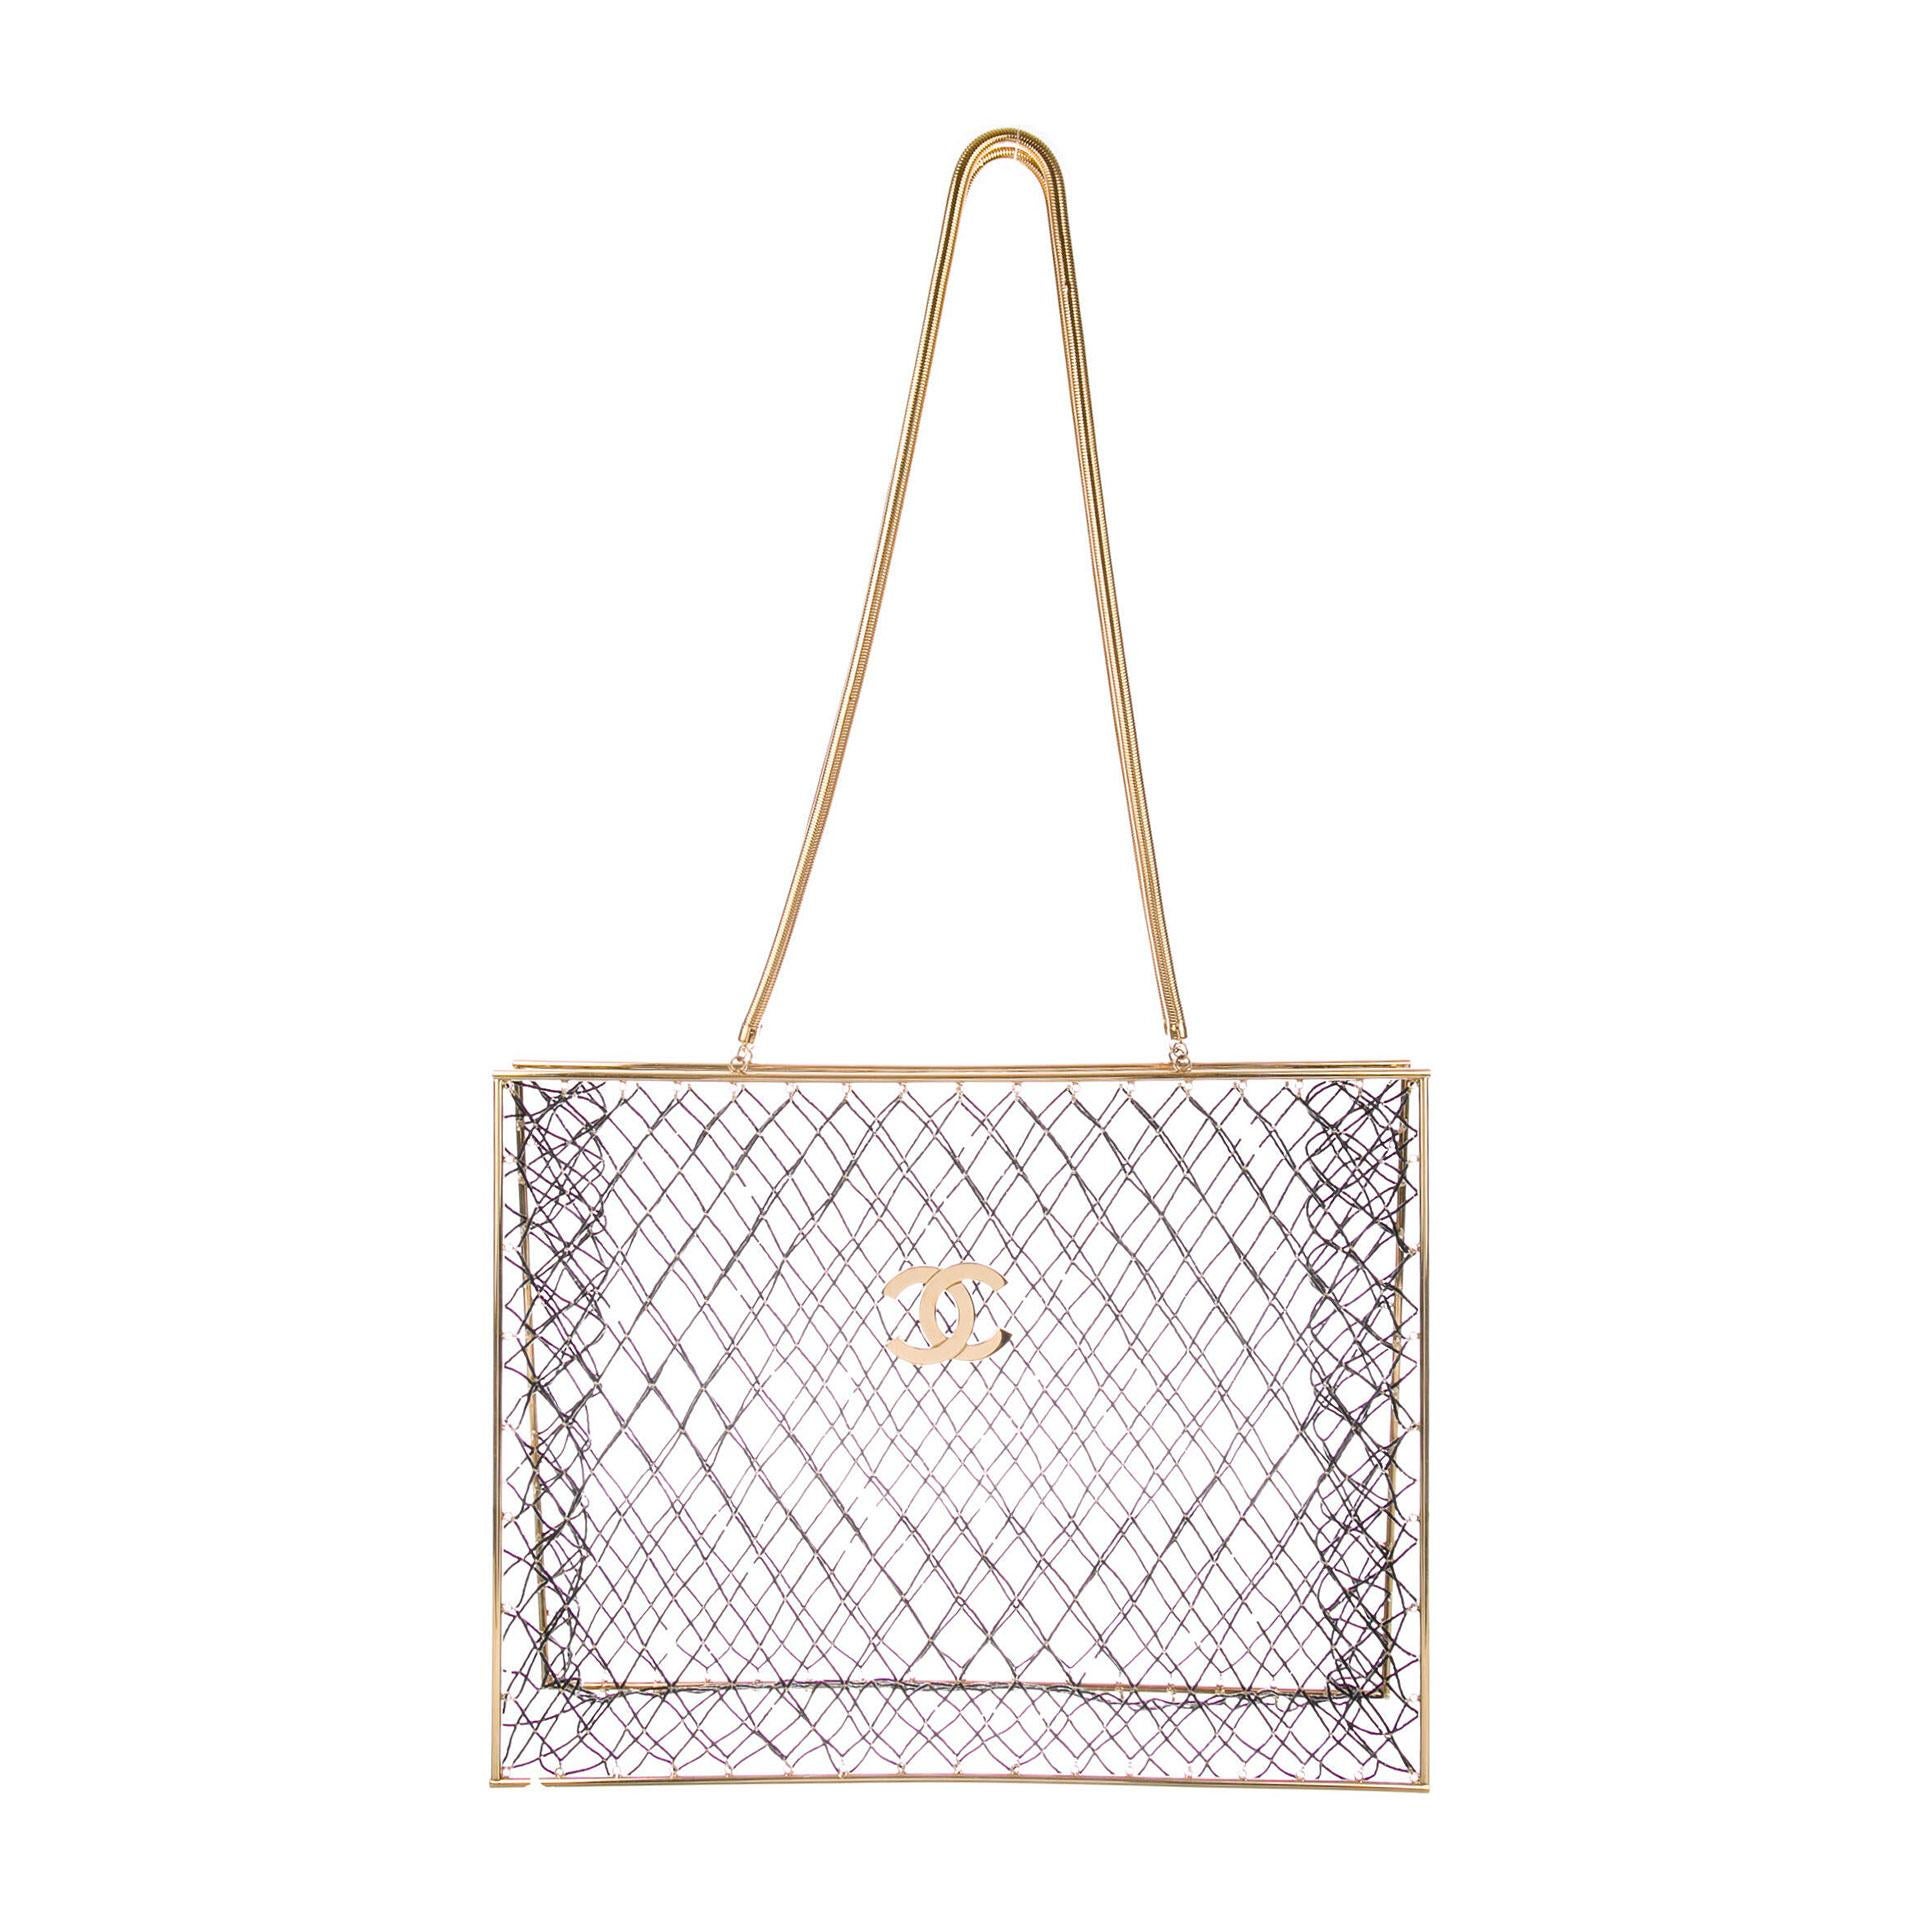 Chanel Rare Spring 1997 Vintage Runway Gold Cage Large Shopping Tote Bag  For Sale 1